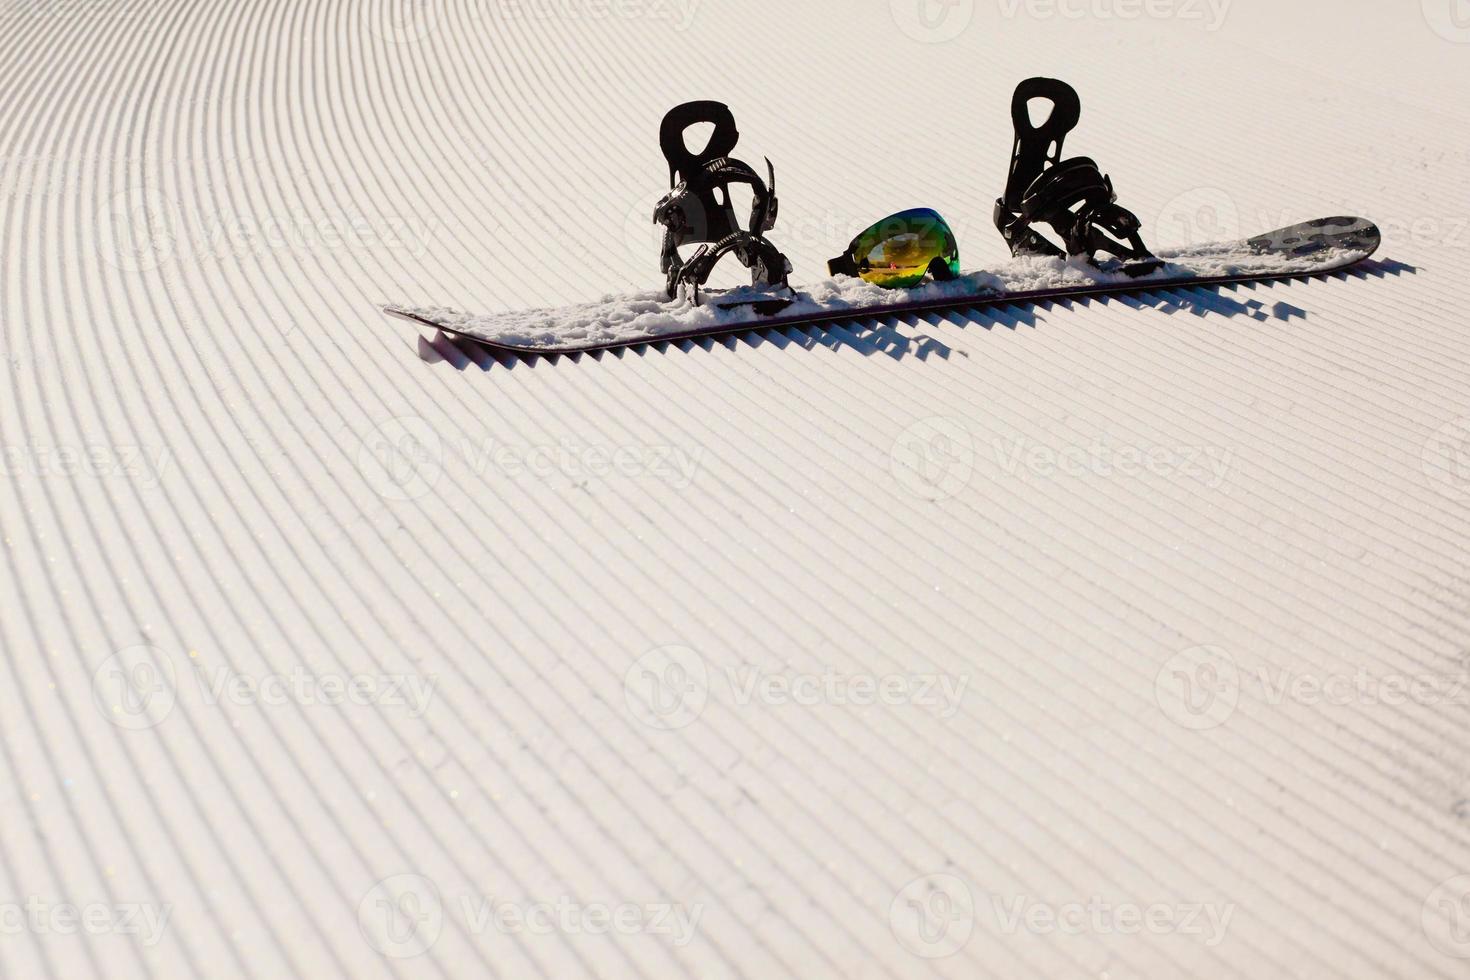 Equipment for snowboarding on a new groomed snow photo